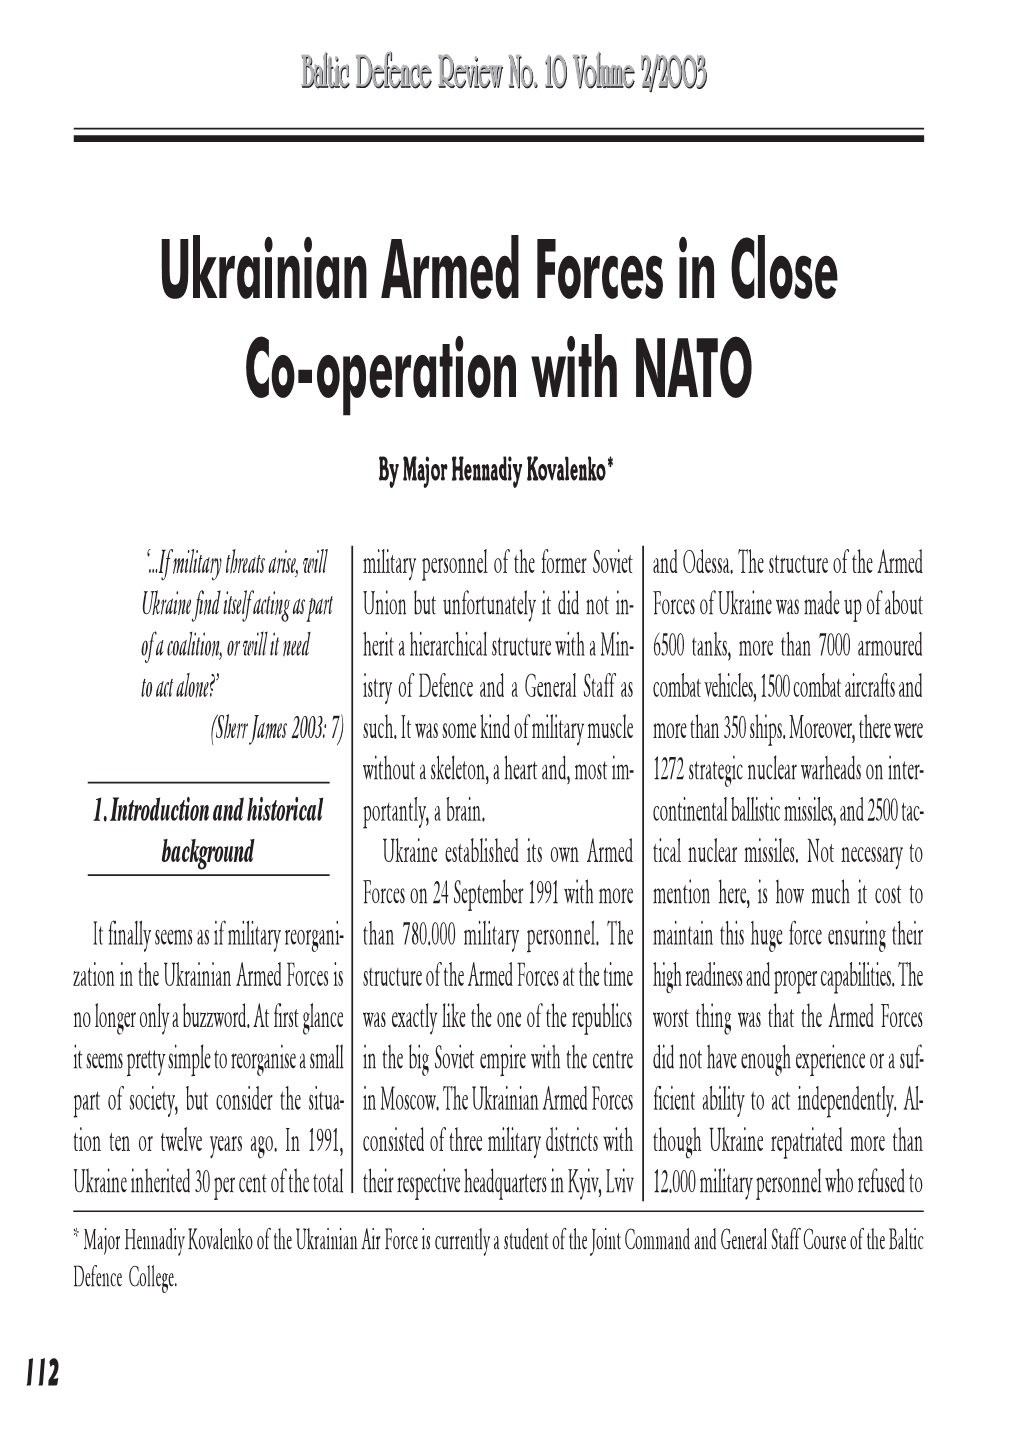 Ukrainian Armed Forces in Close Co-Operation with NATO